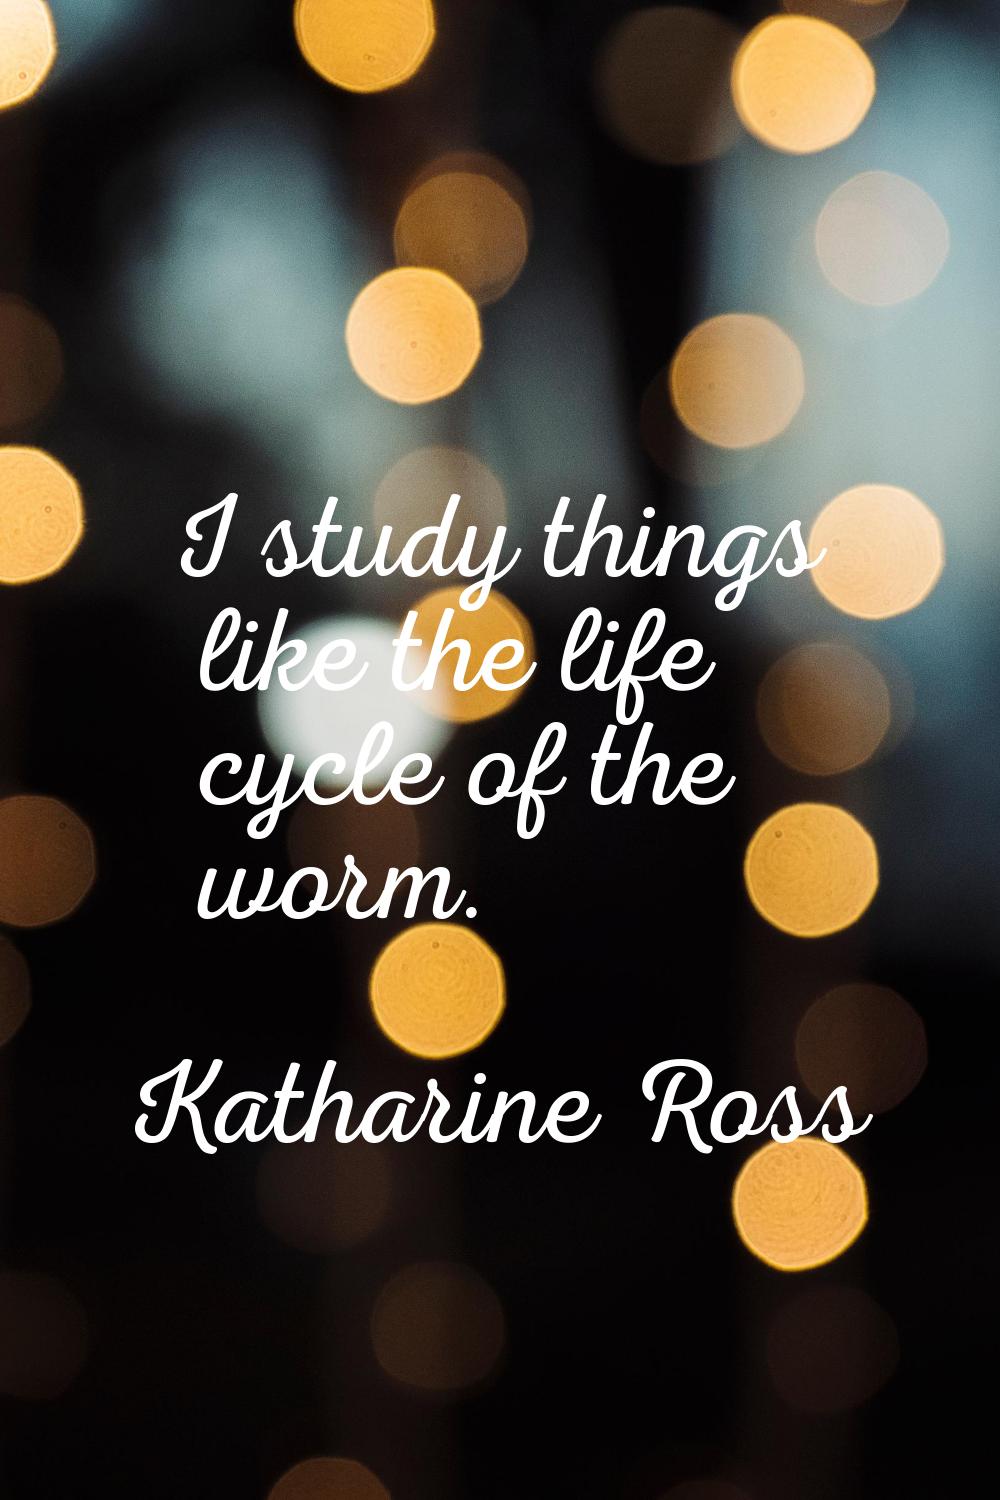 I study things like the life cycle of the worm.